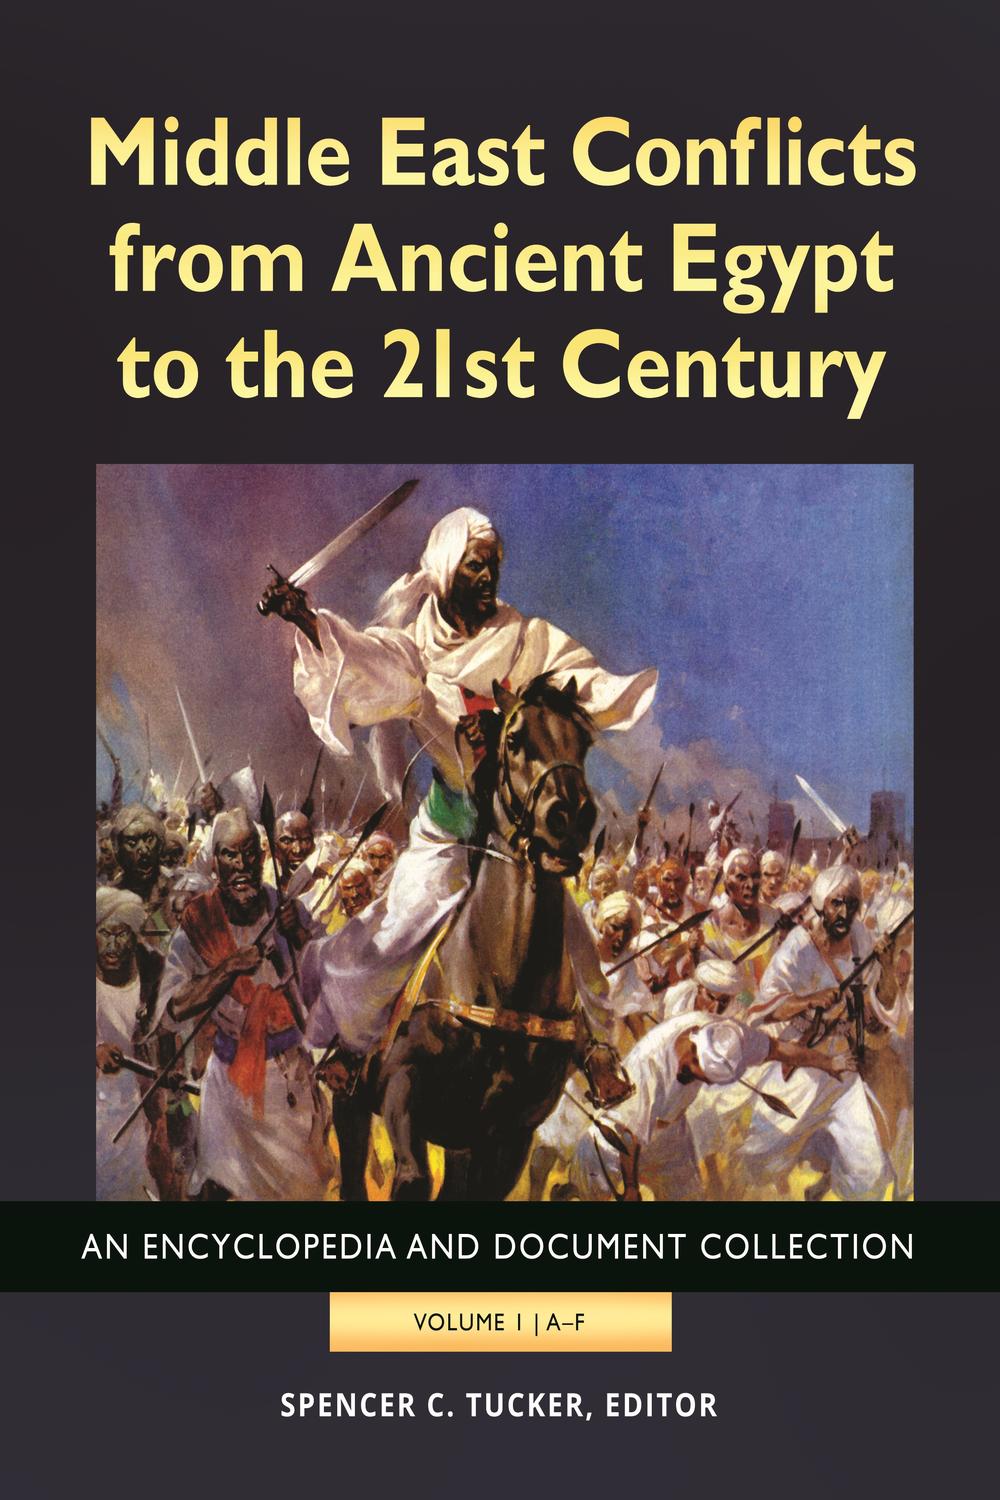 Middle East Conflicts from Ancient Egypt to the 21st Century [4 volumes] - Spencer C. Tucker